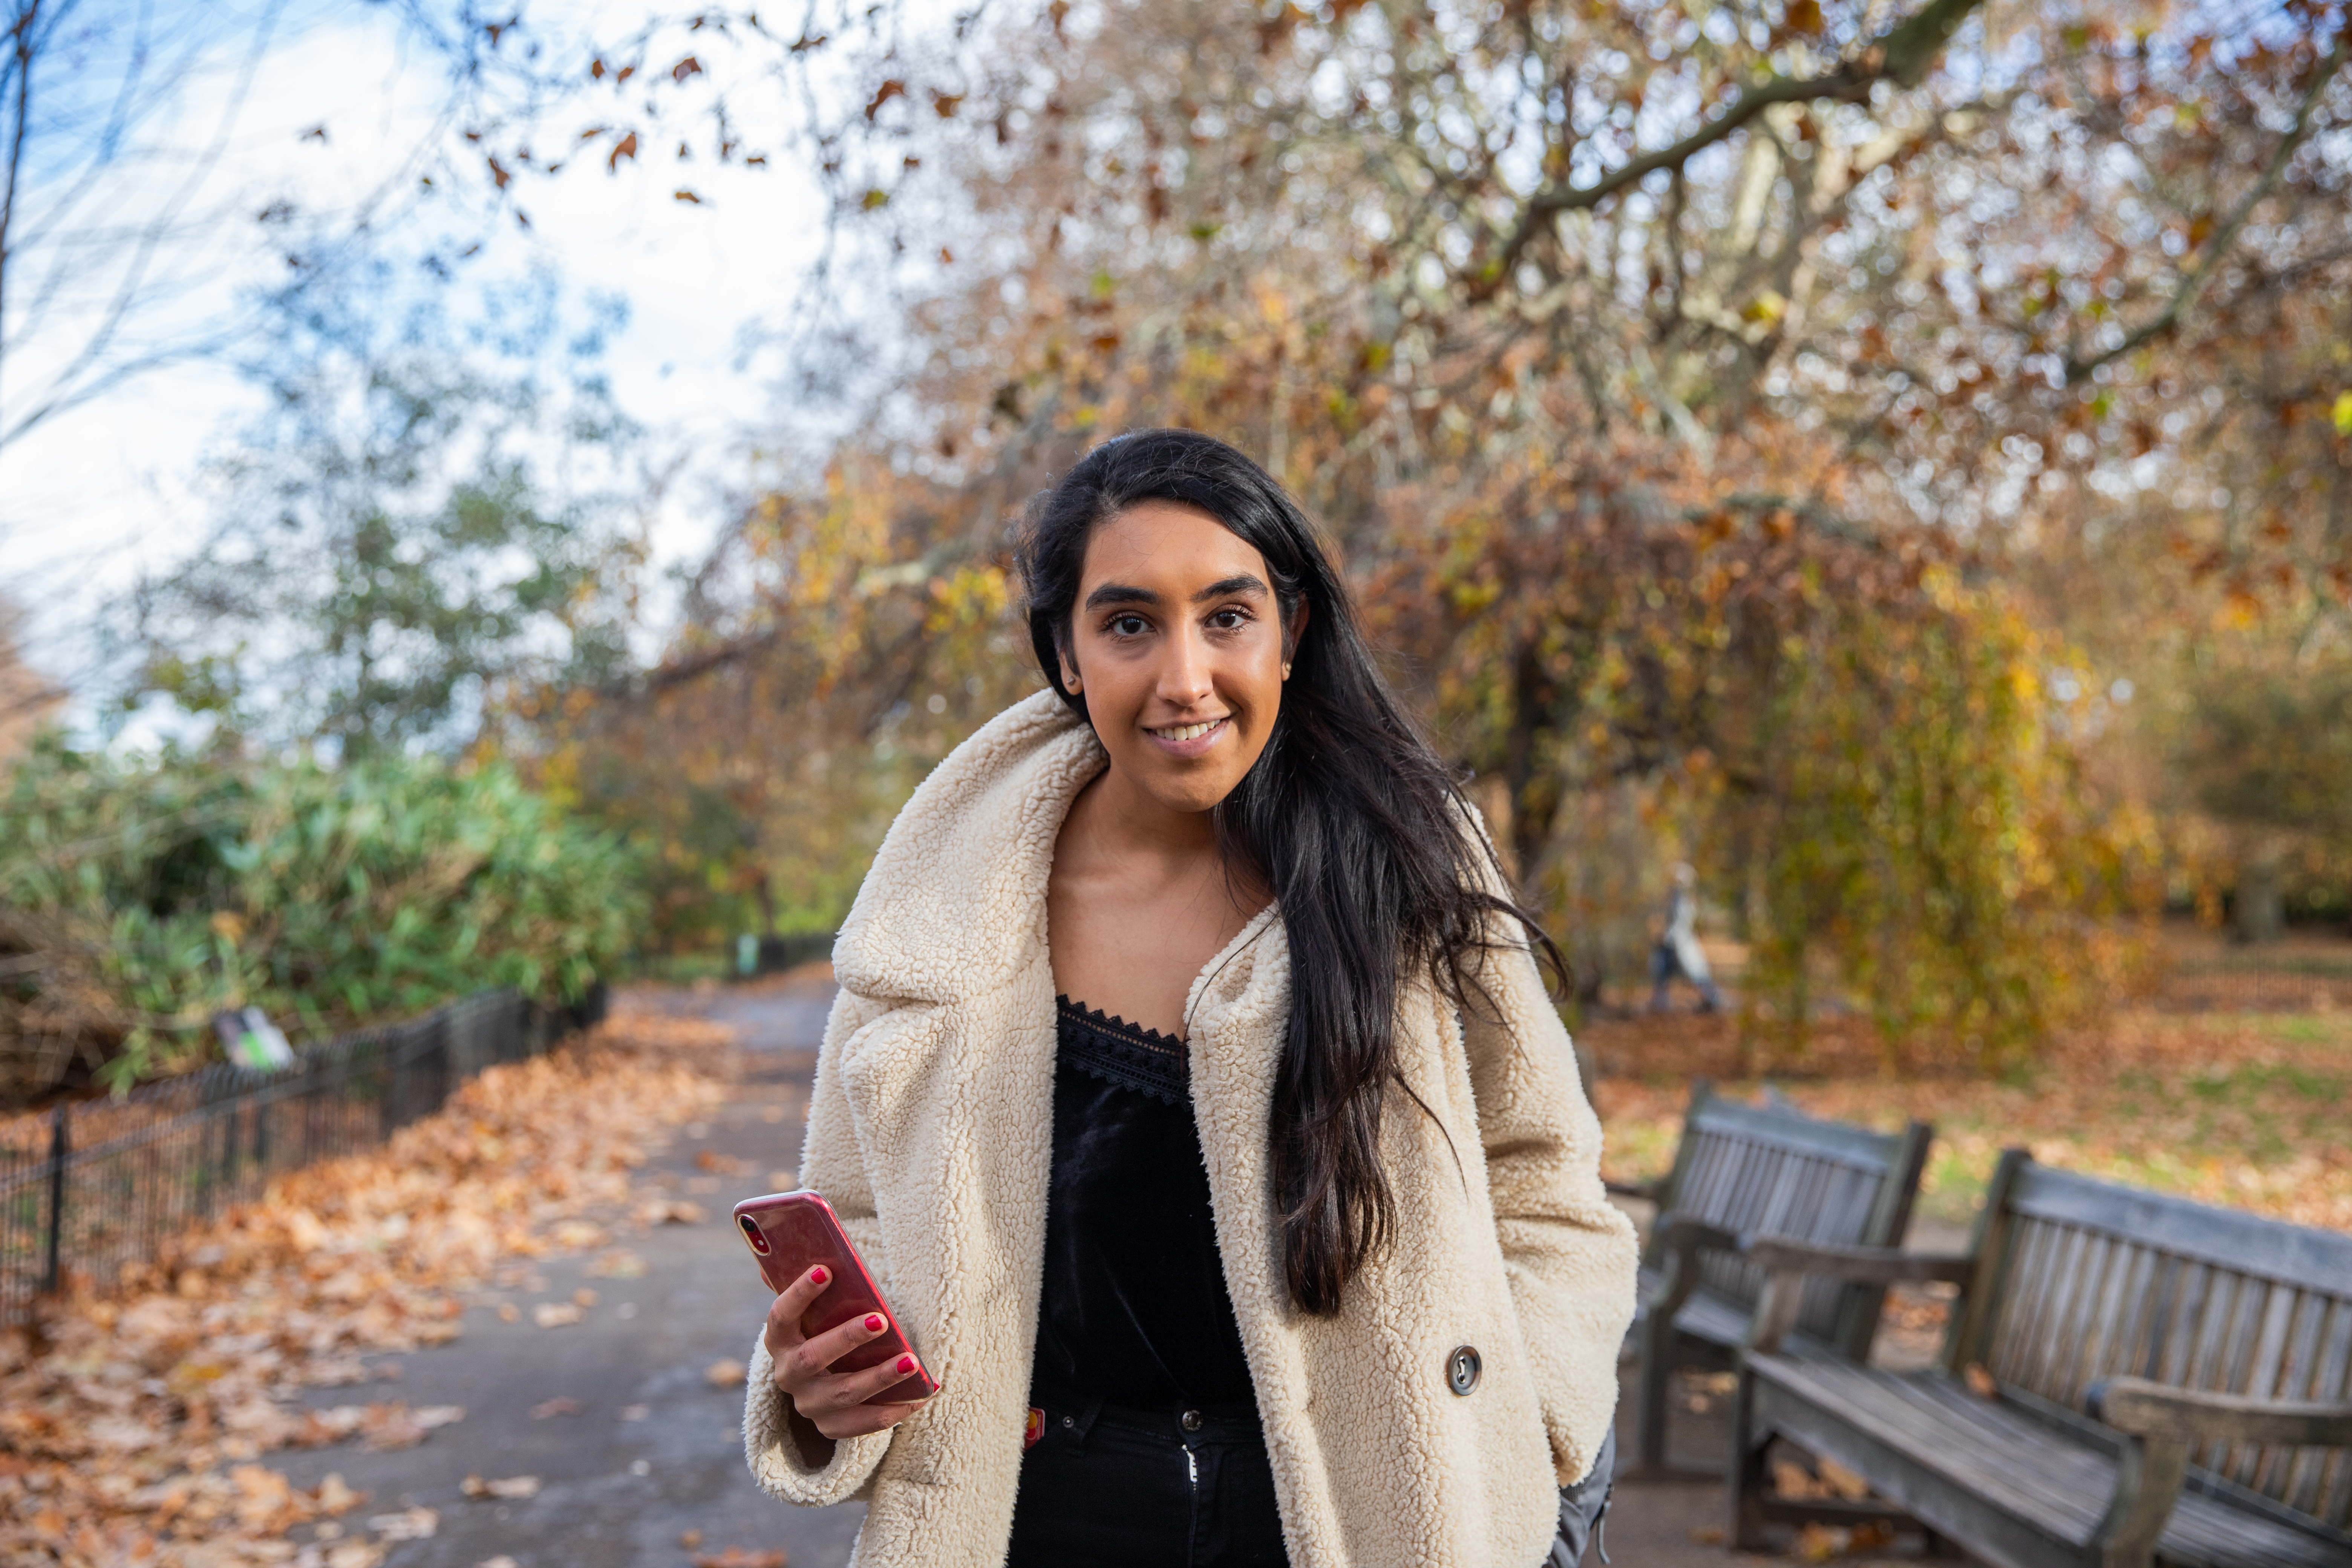 Smiling woman stood outside under autumn trees holding mobile phone